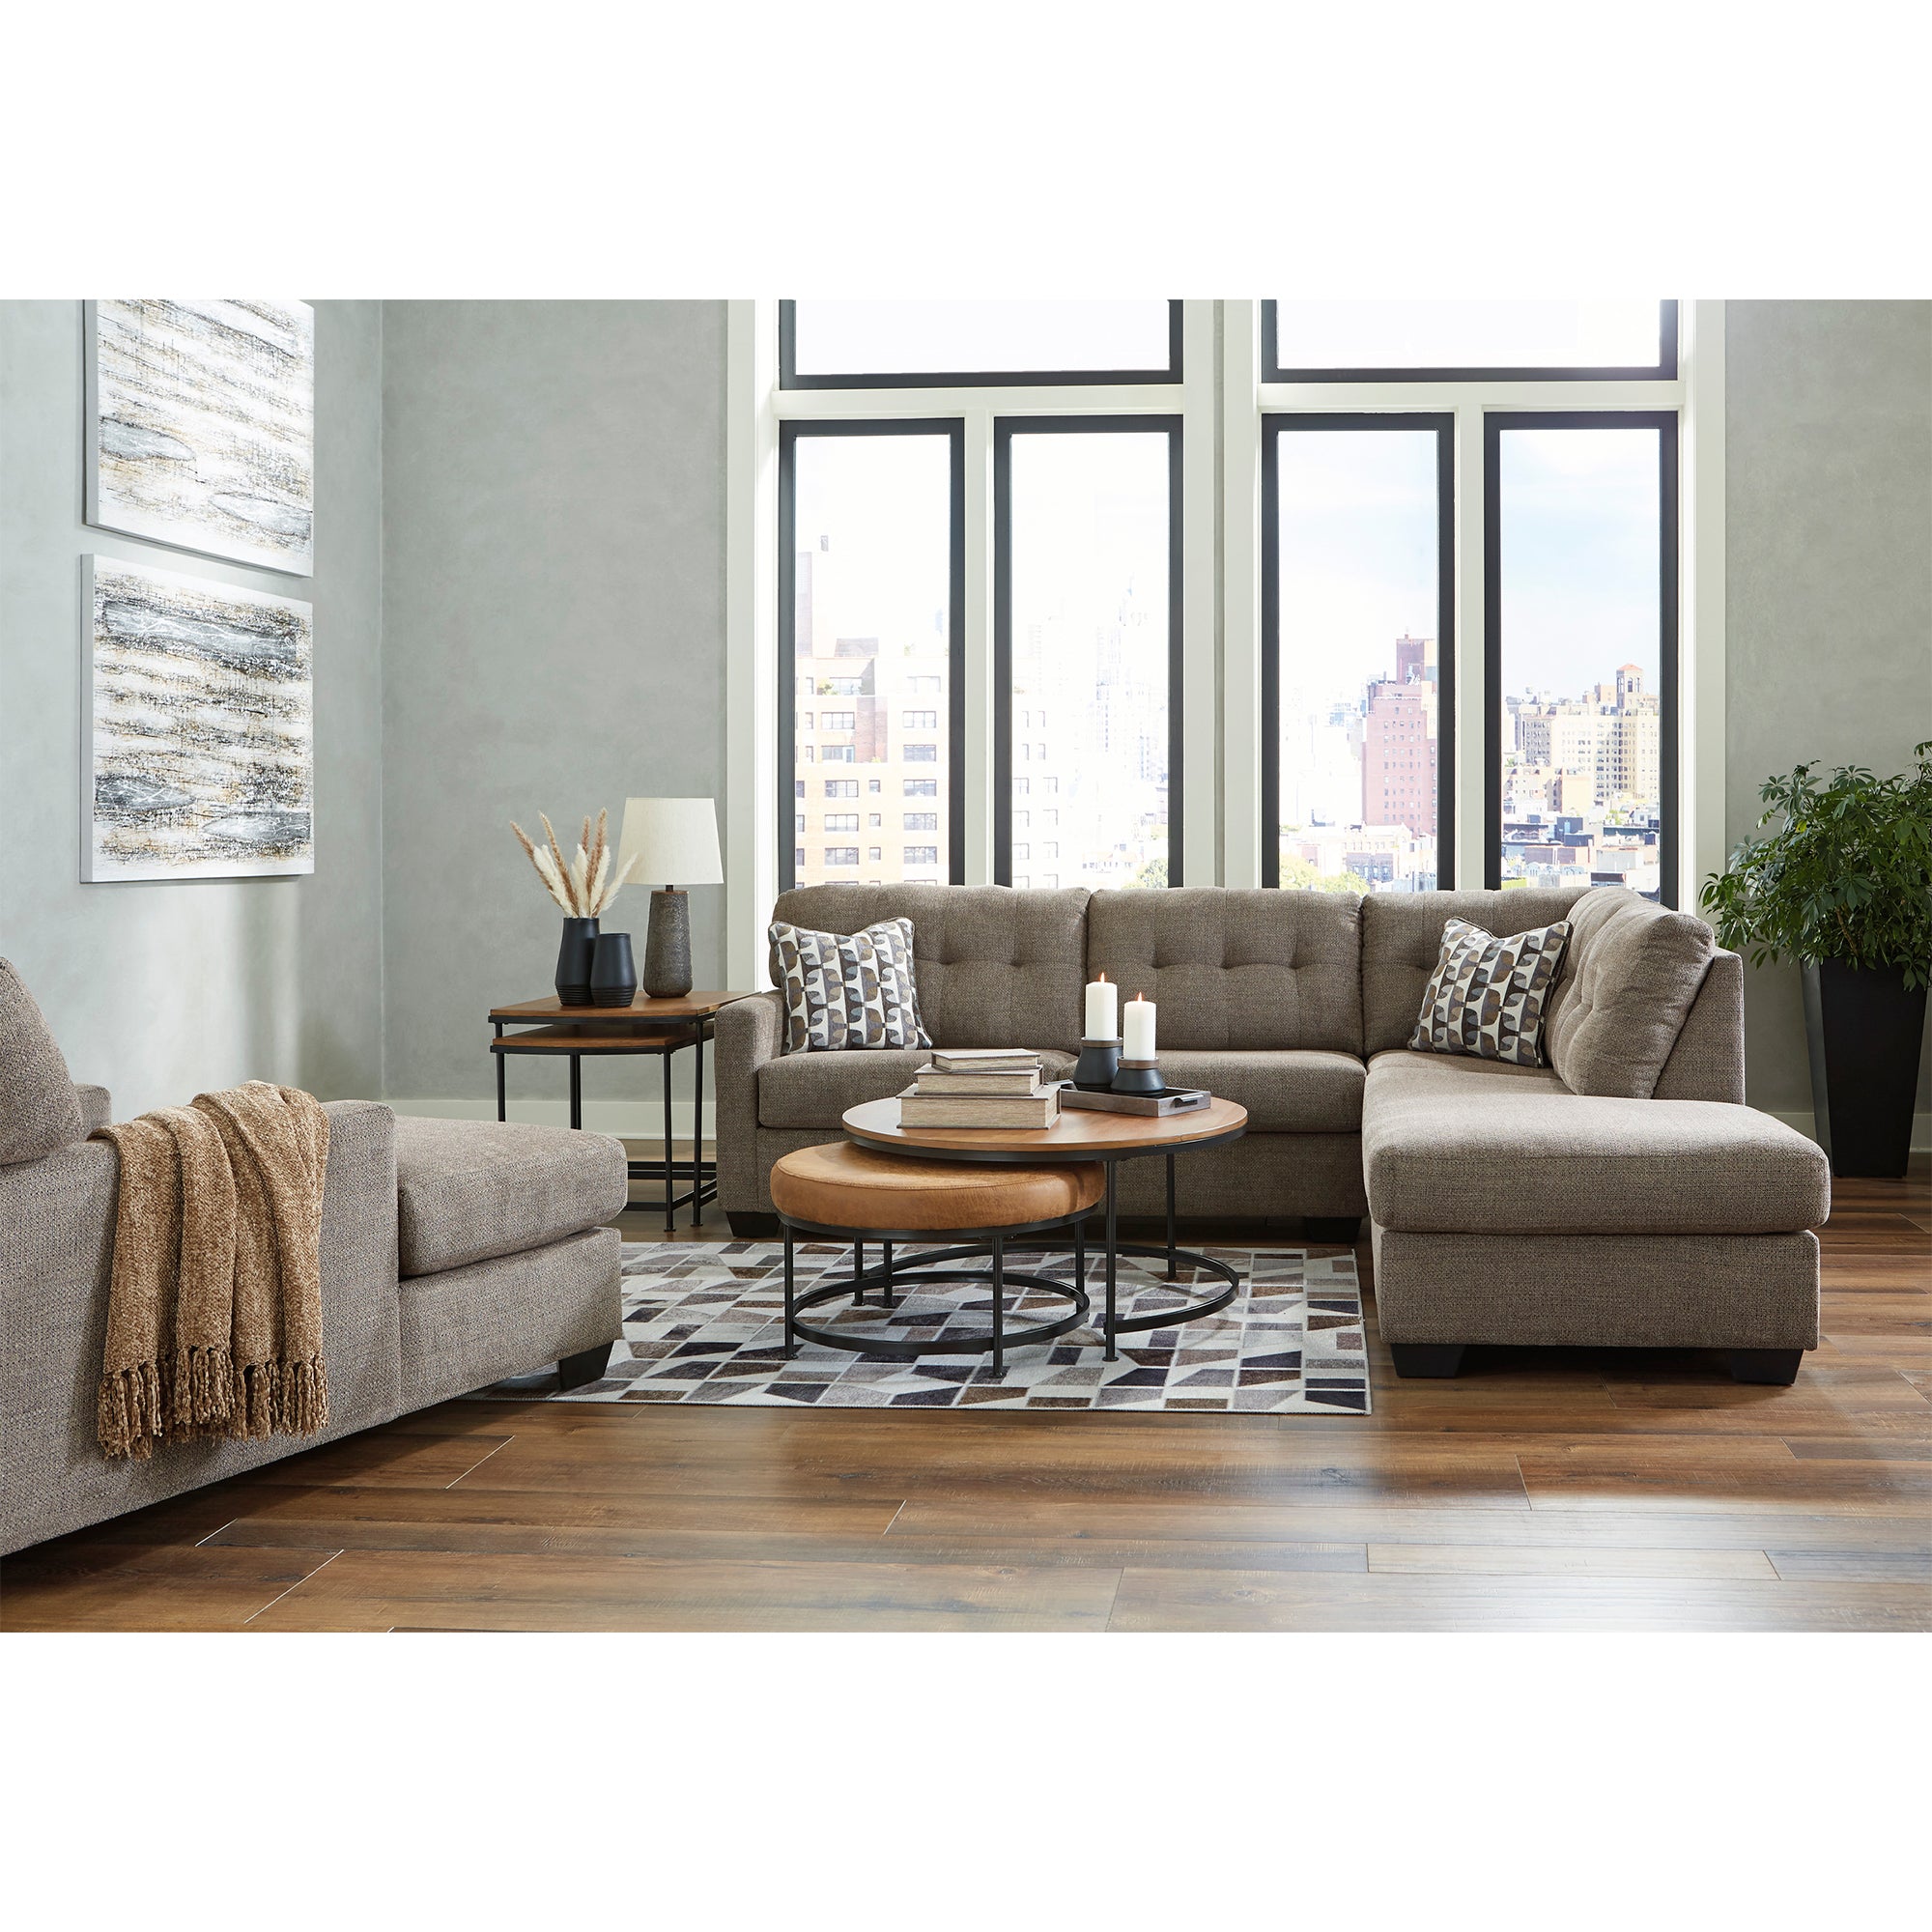 Stylish chocolate Mahoney Sectional with spacious chaise, combines comfort with modern design